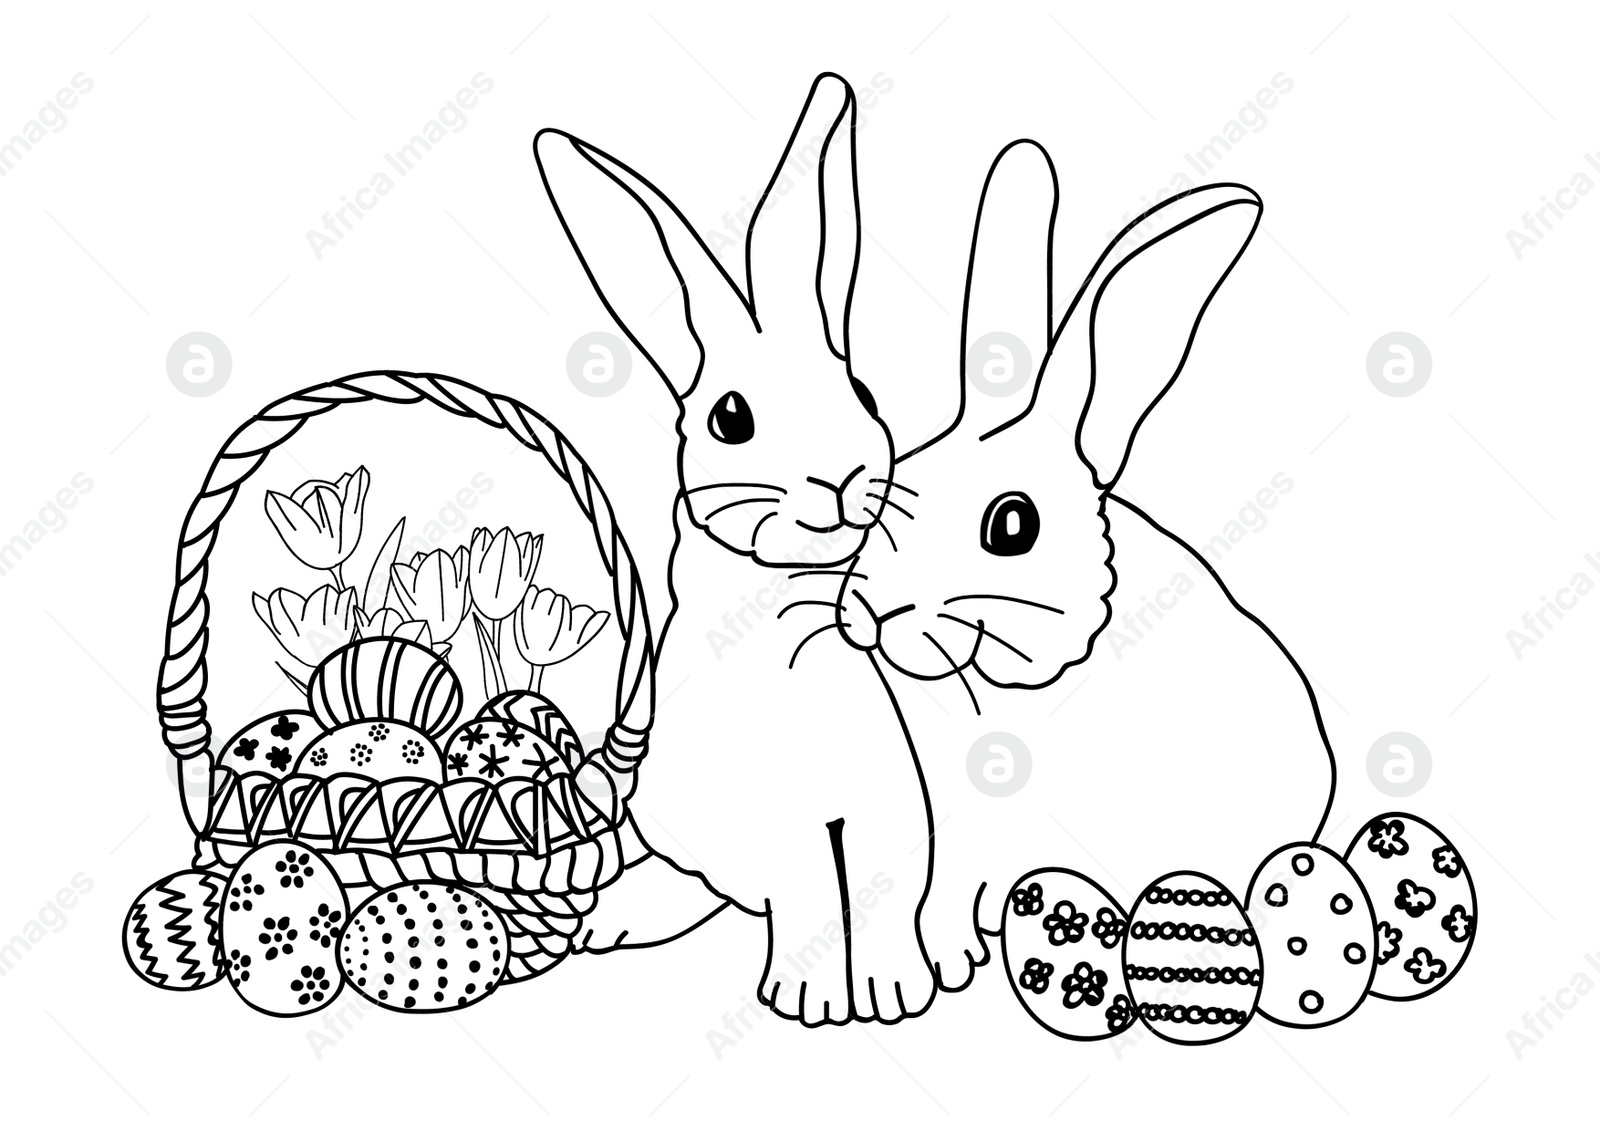 Illustration of Cute bunnies and Easter eggs on white background, illustration. Coloring page 